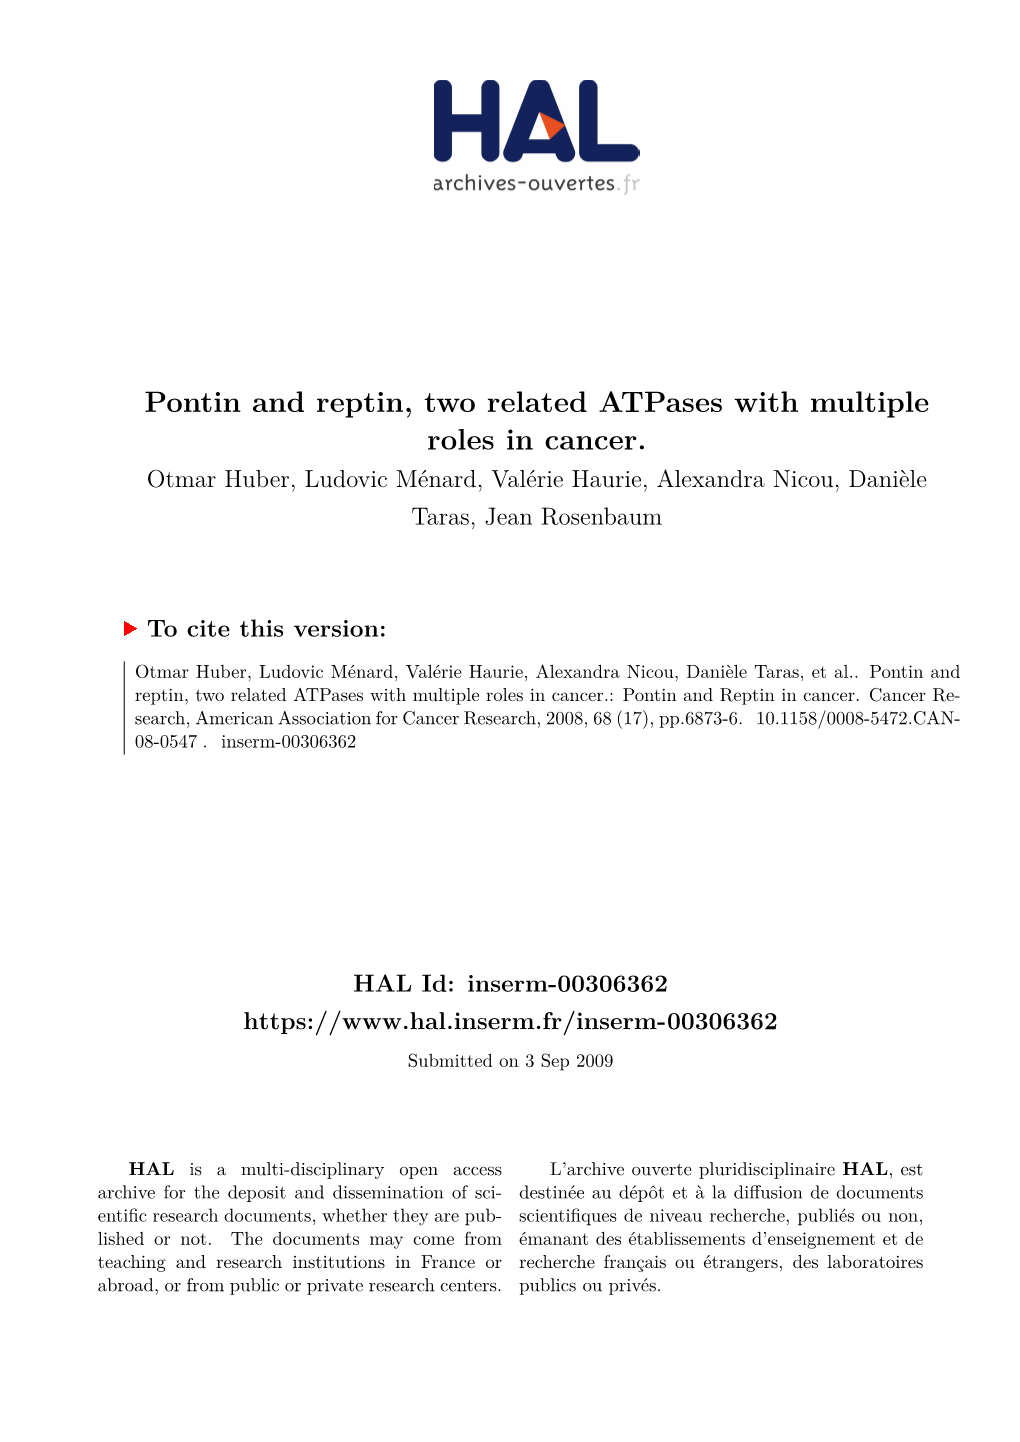 Pontin and Reptin, Two Related Atpases with Multiple Roles in Cancer. Otmar Huber, Ludovic Ménard, Valérie Haurie, Alexandra Nicou, Danièle Taras, Jean Rosenbaum